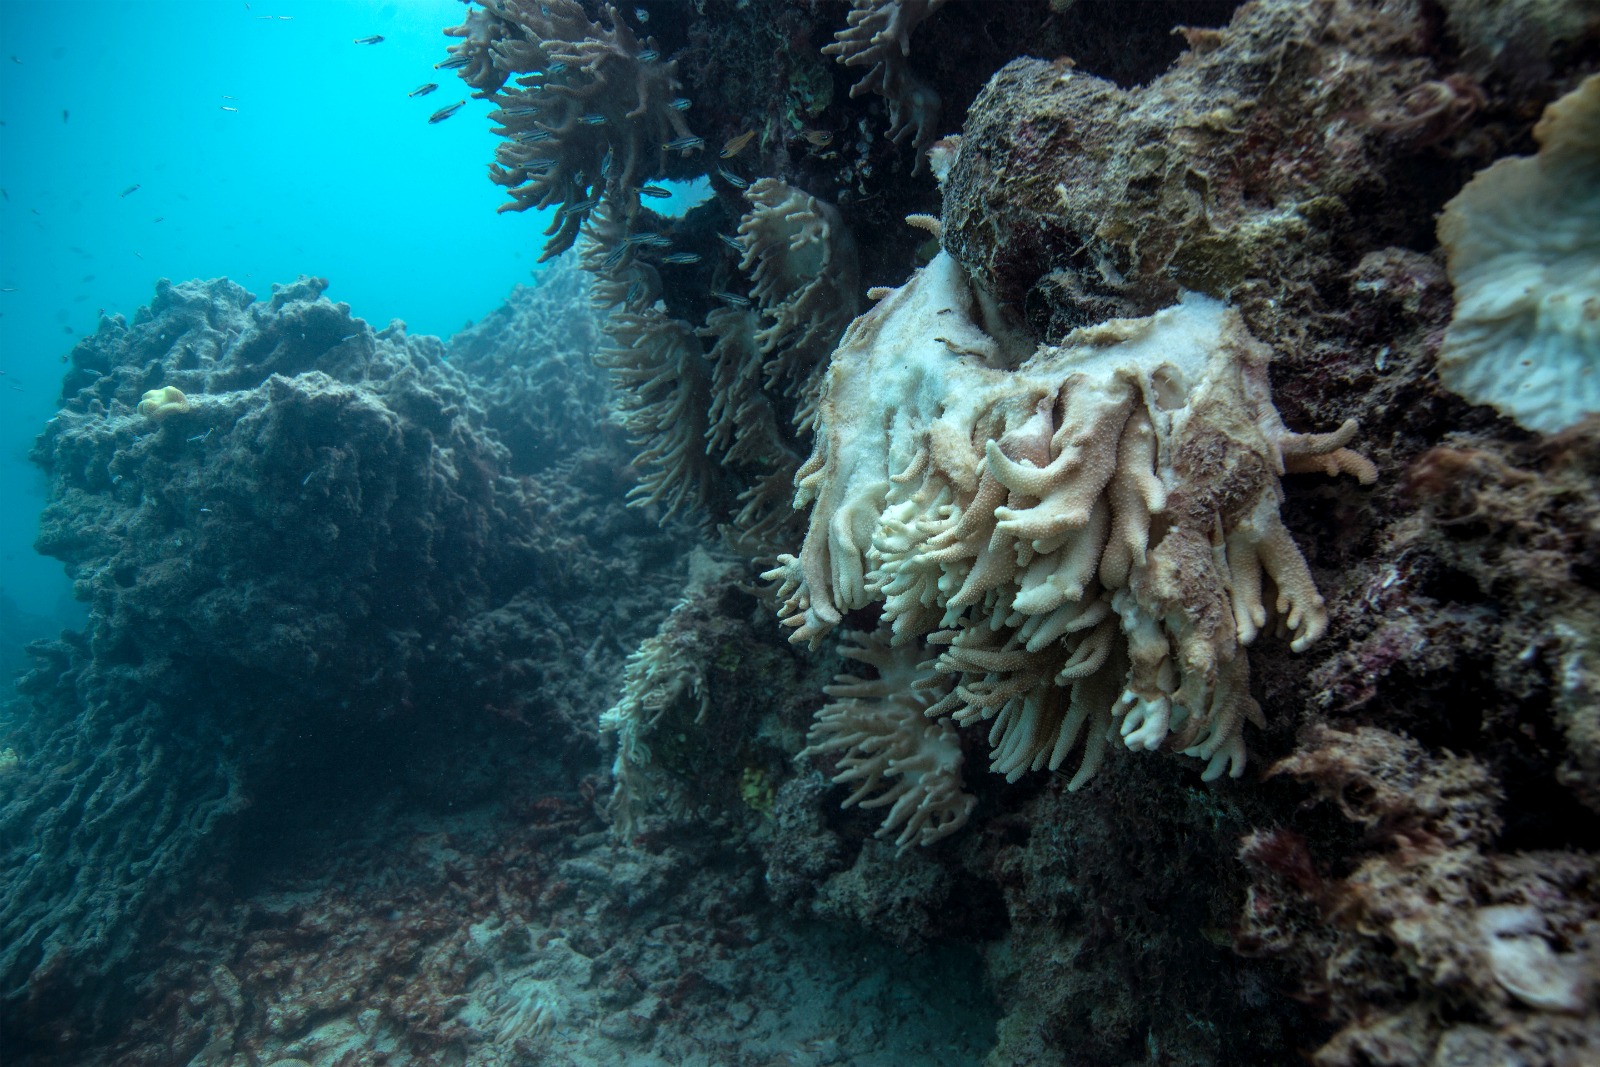 Soft coral decomposing and falling off the reef.